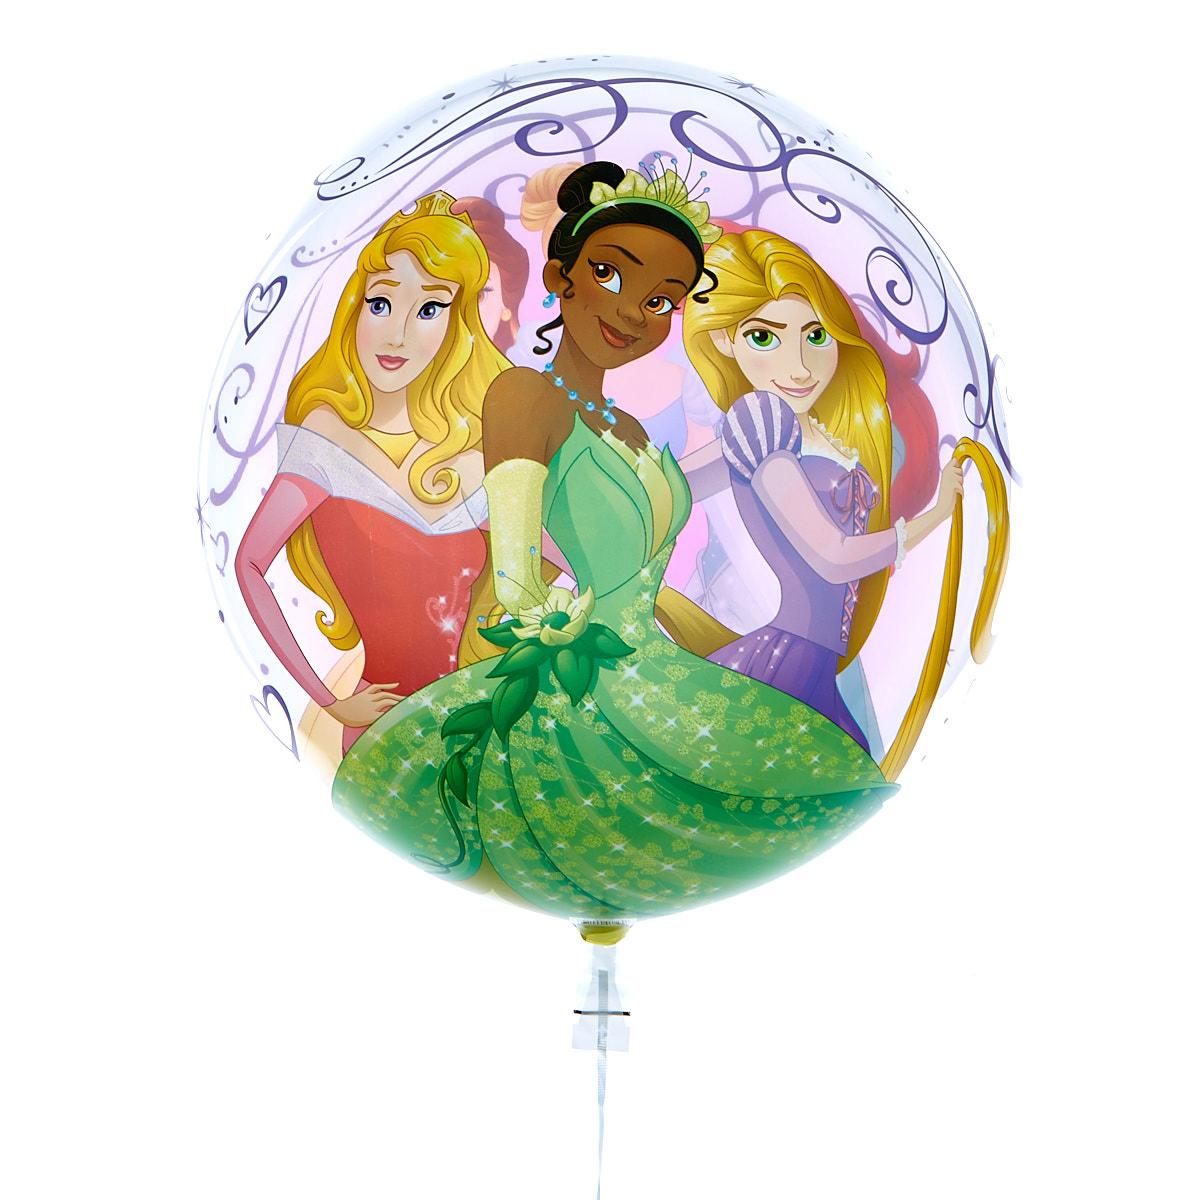 22-Inch Bubble Balloon - Disney Princesses - DELIVERED INFLATED!